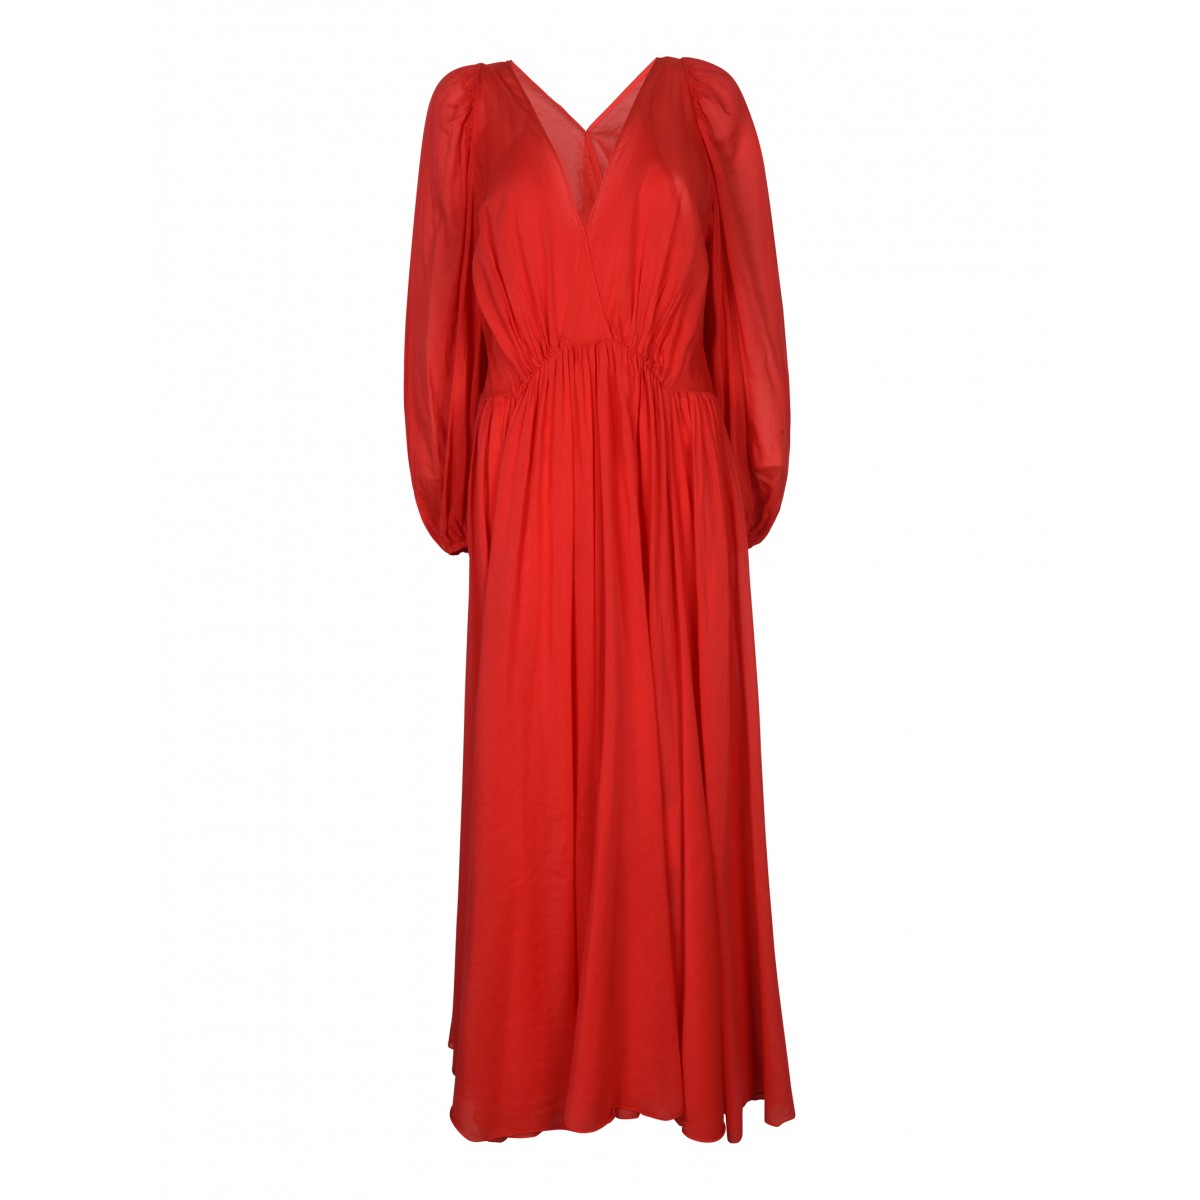 Red long dress in cotton and silk voile